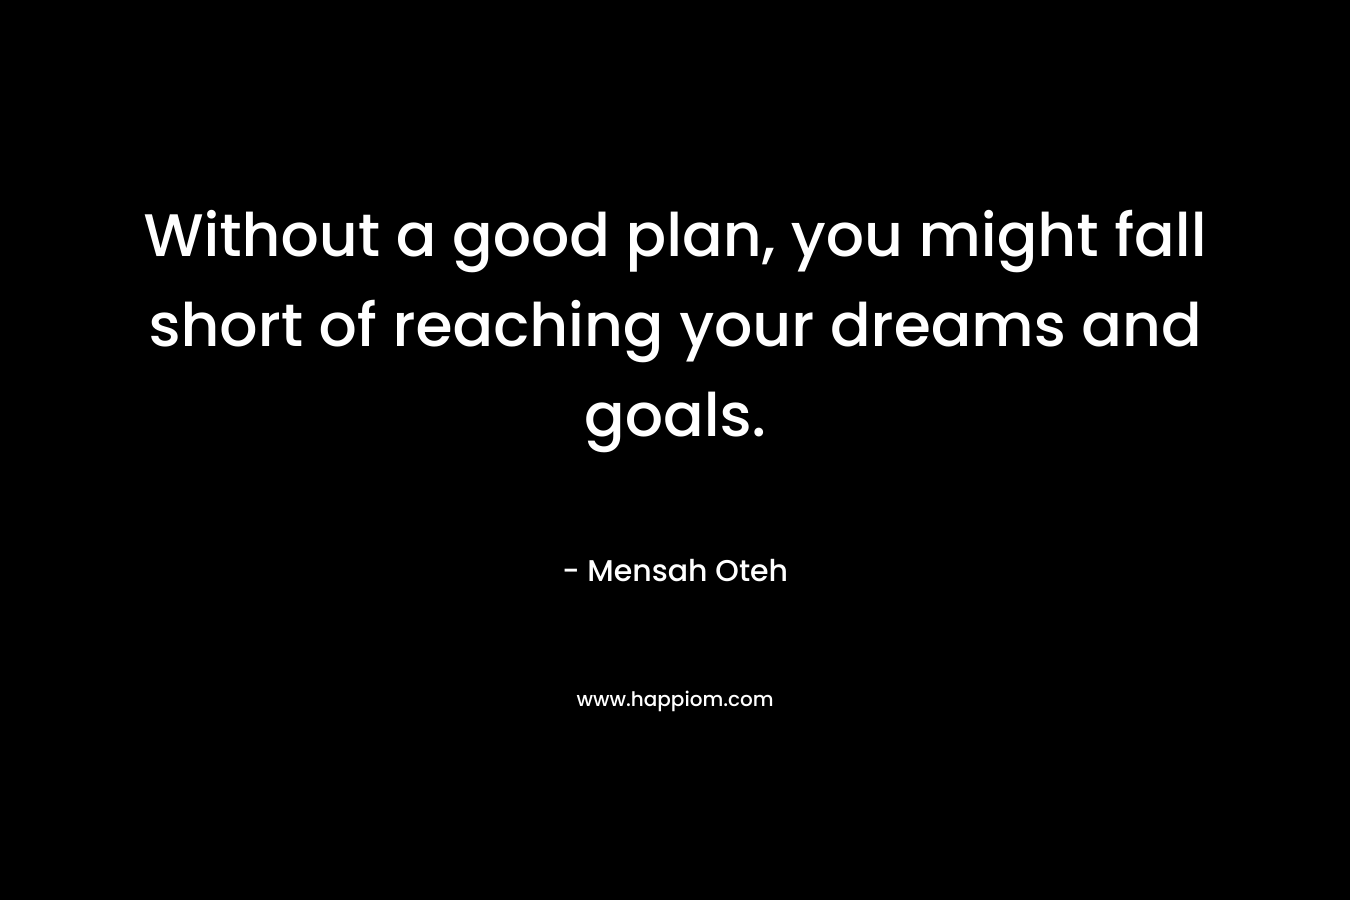 Without a good plan, you might fall short of reaching your dreams and goals.